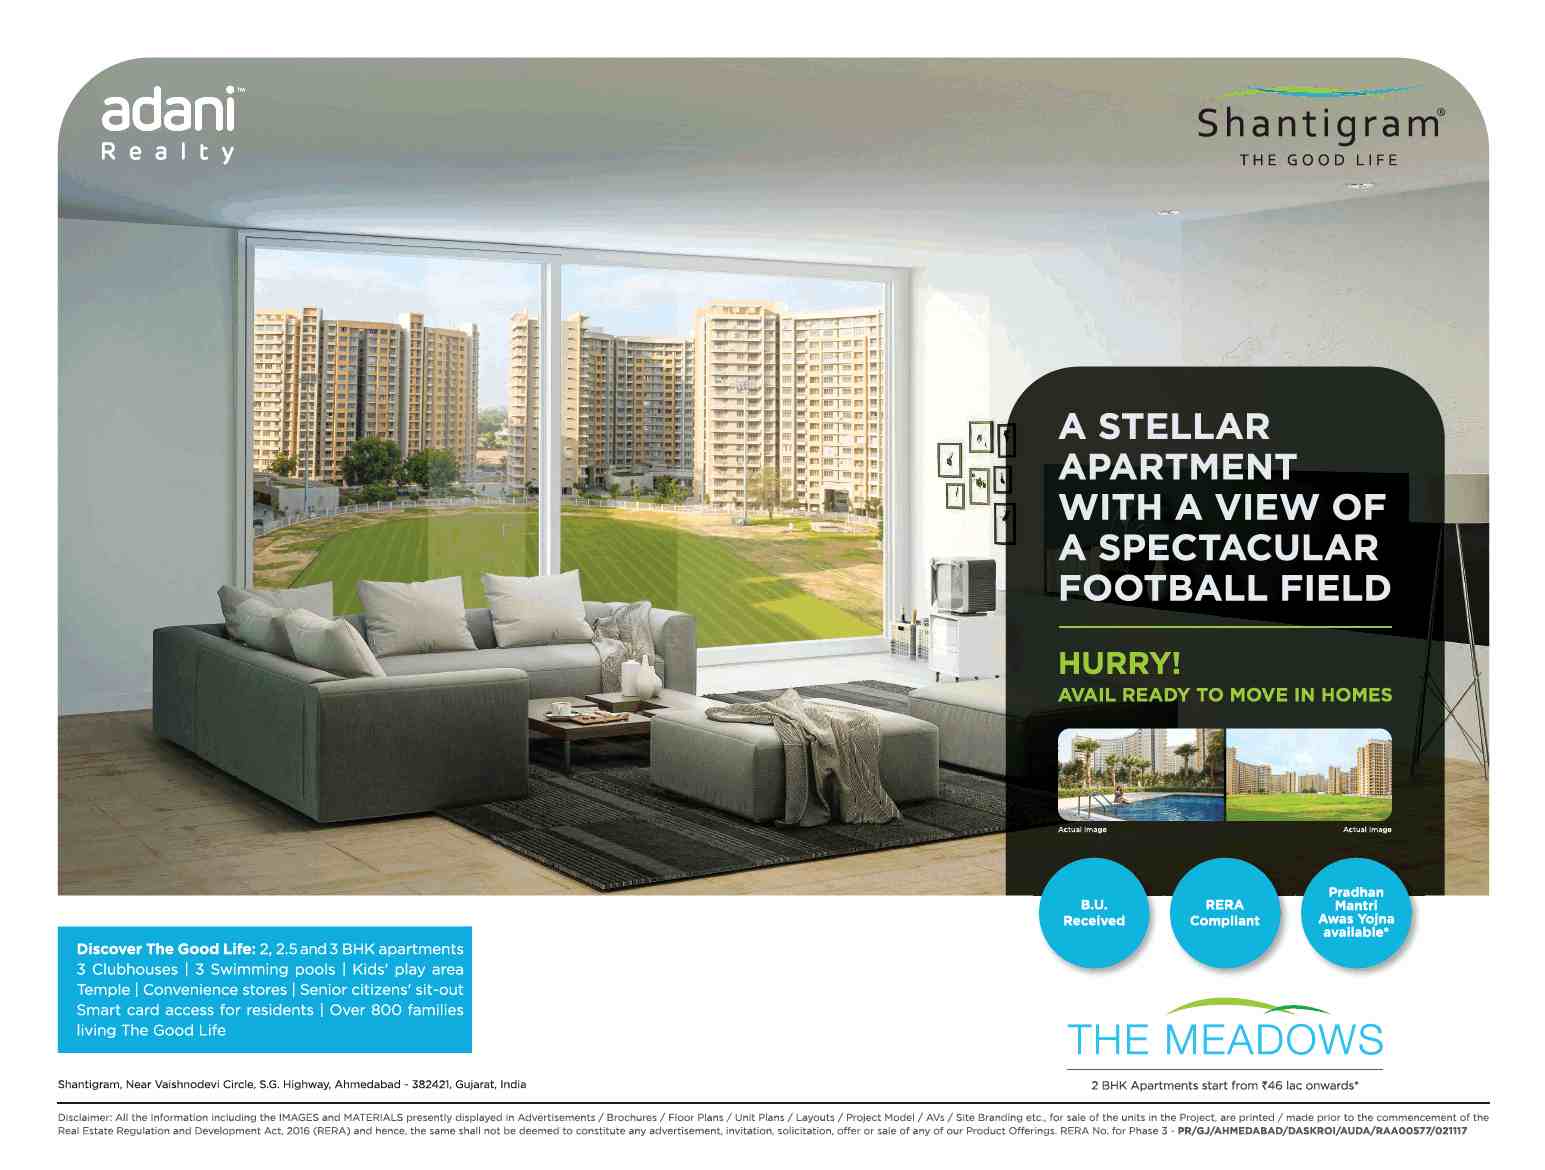 Get a view of spectacular football field by residing at Adani Shantigram Meadows in Ahmedabad